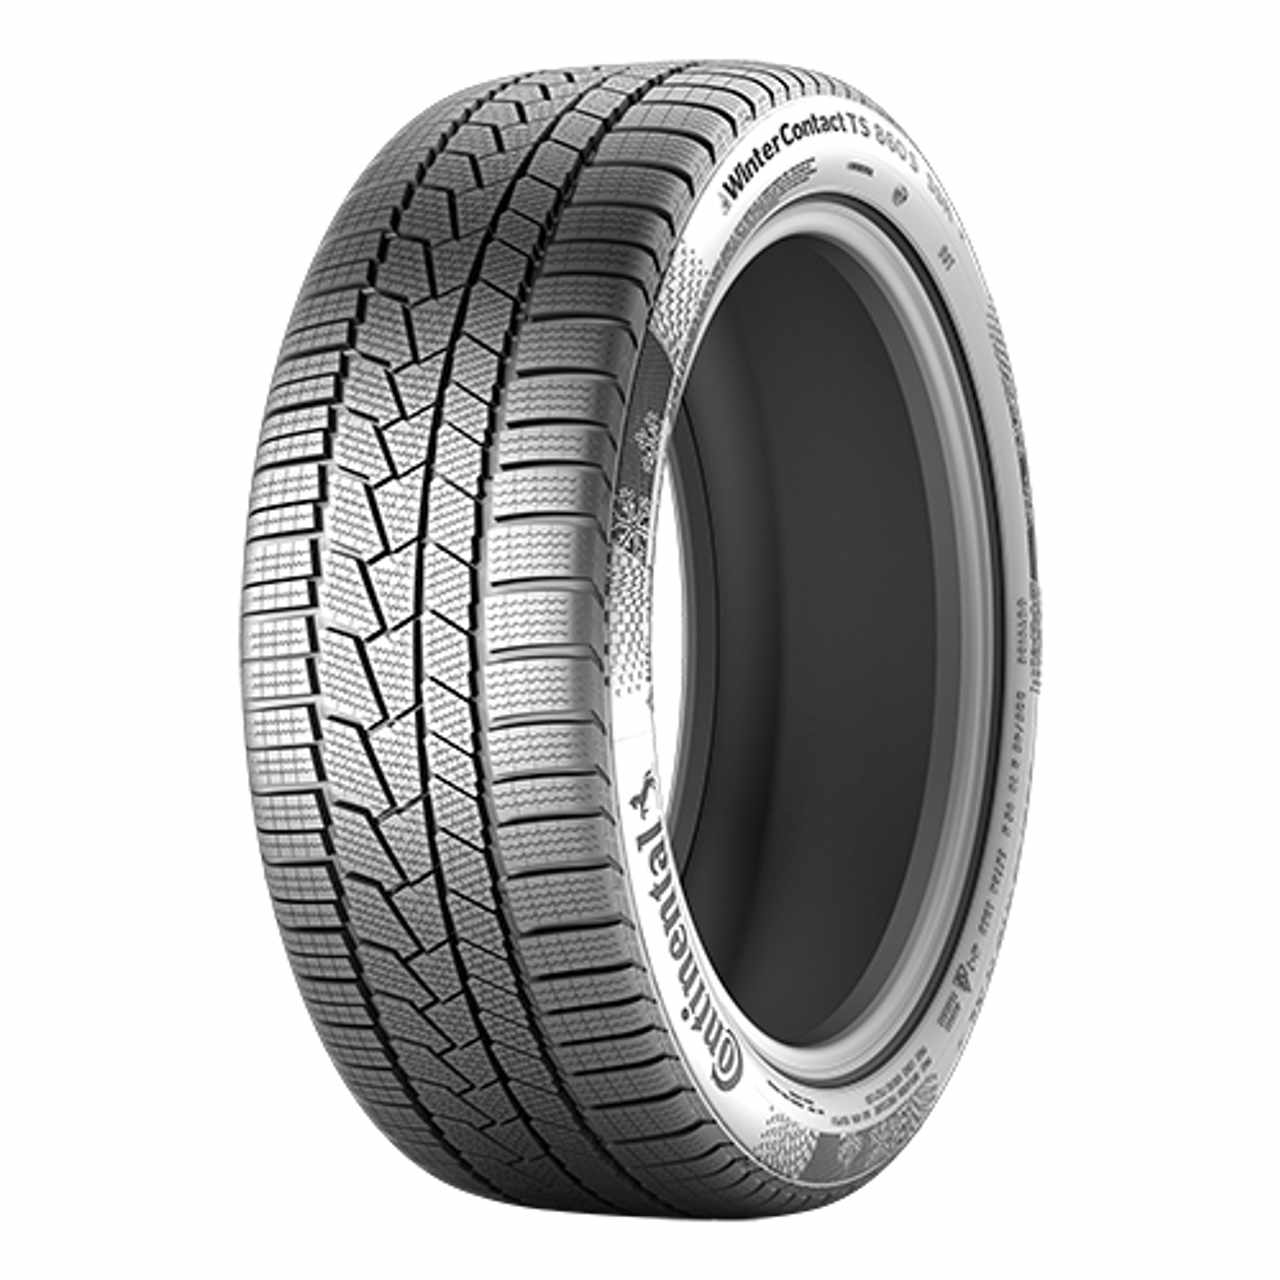 CONTINENTAL WINTERCONTACT TS 860 S (NF0) (EVc) 225/55R19 103V FR von Continental